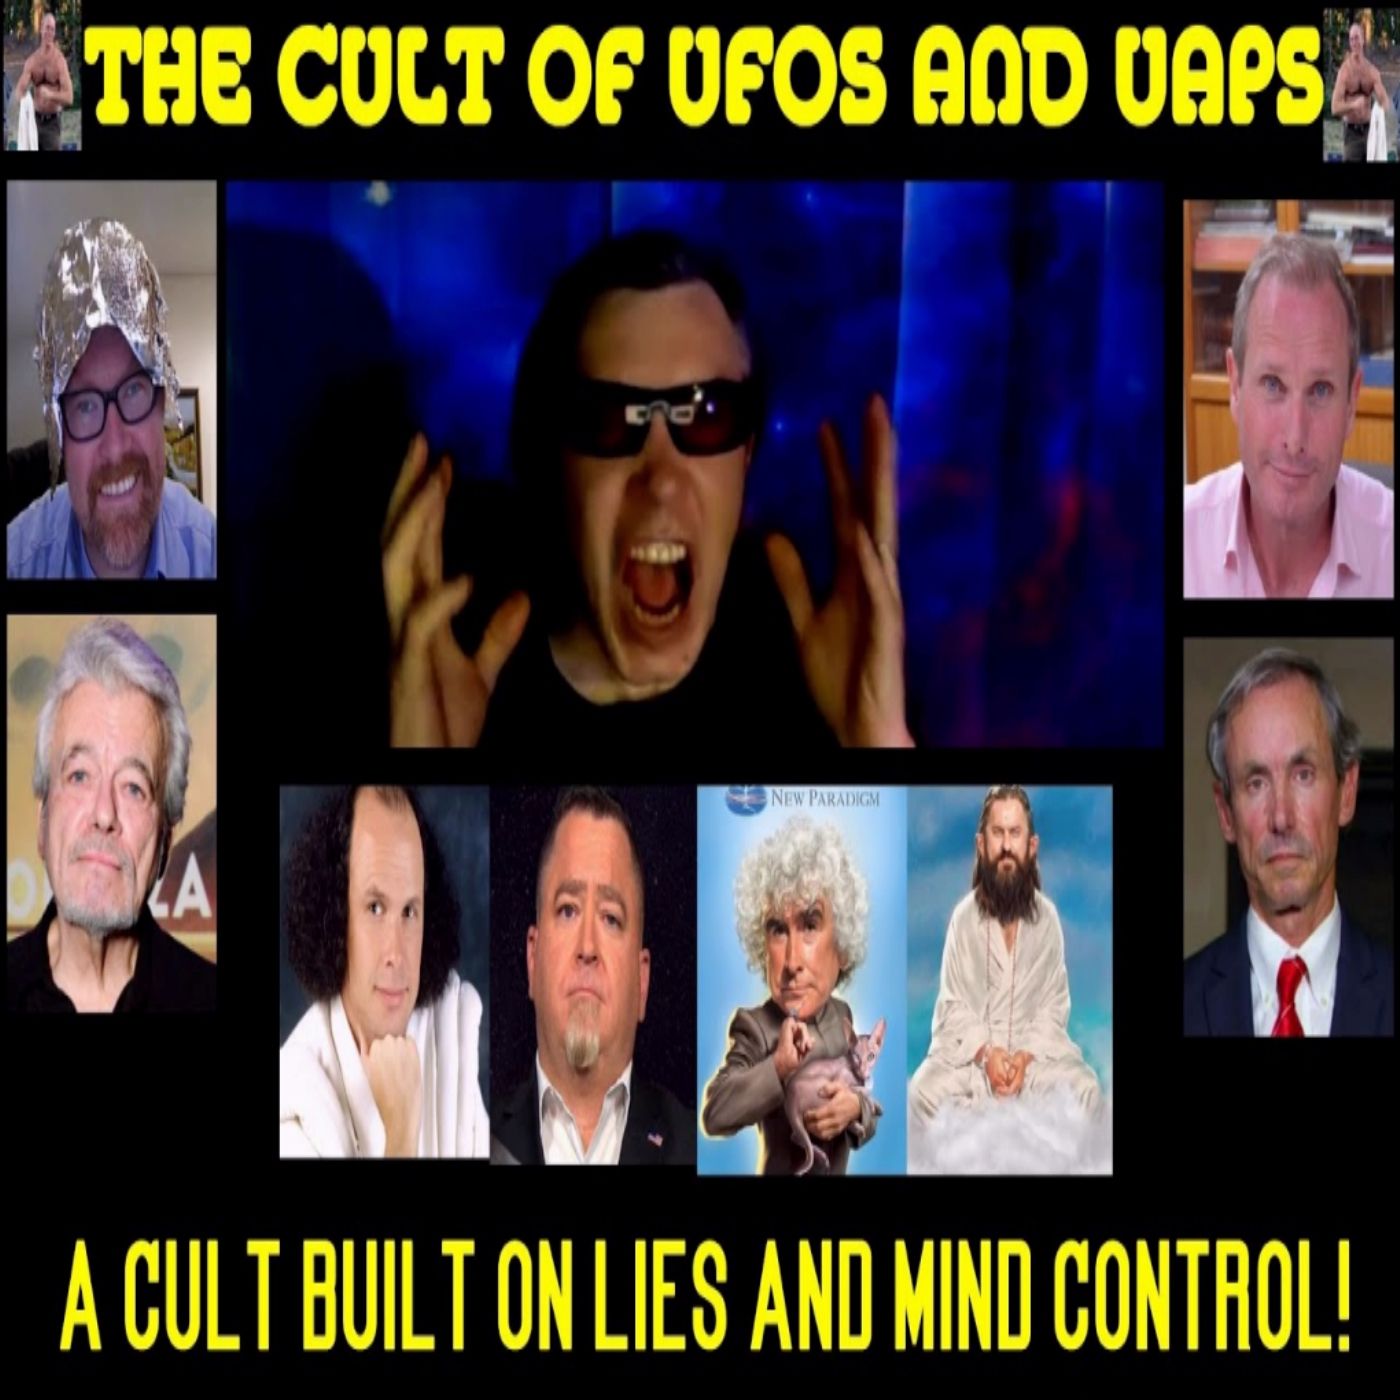 The CULT of UFOS and UAPS! Dave Grusch, Elizondo, Jeremy Corbell, Danny Sheehan, Nolan and more!